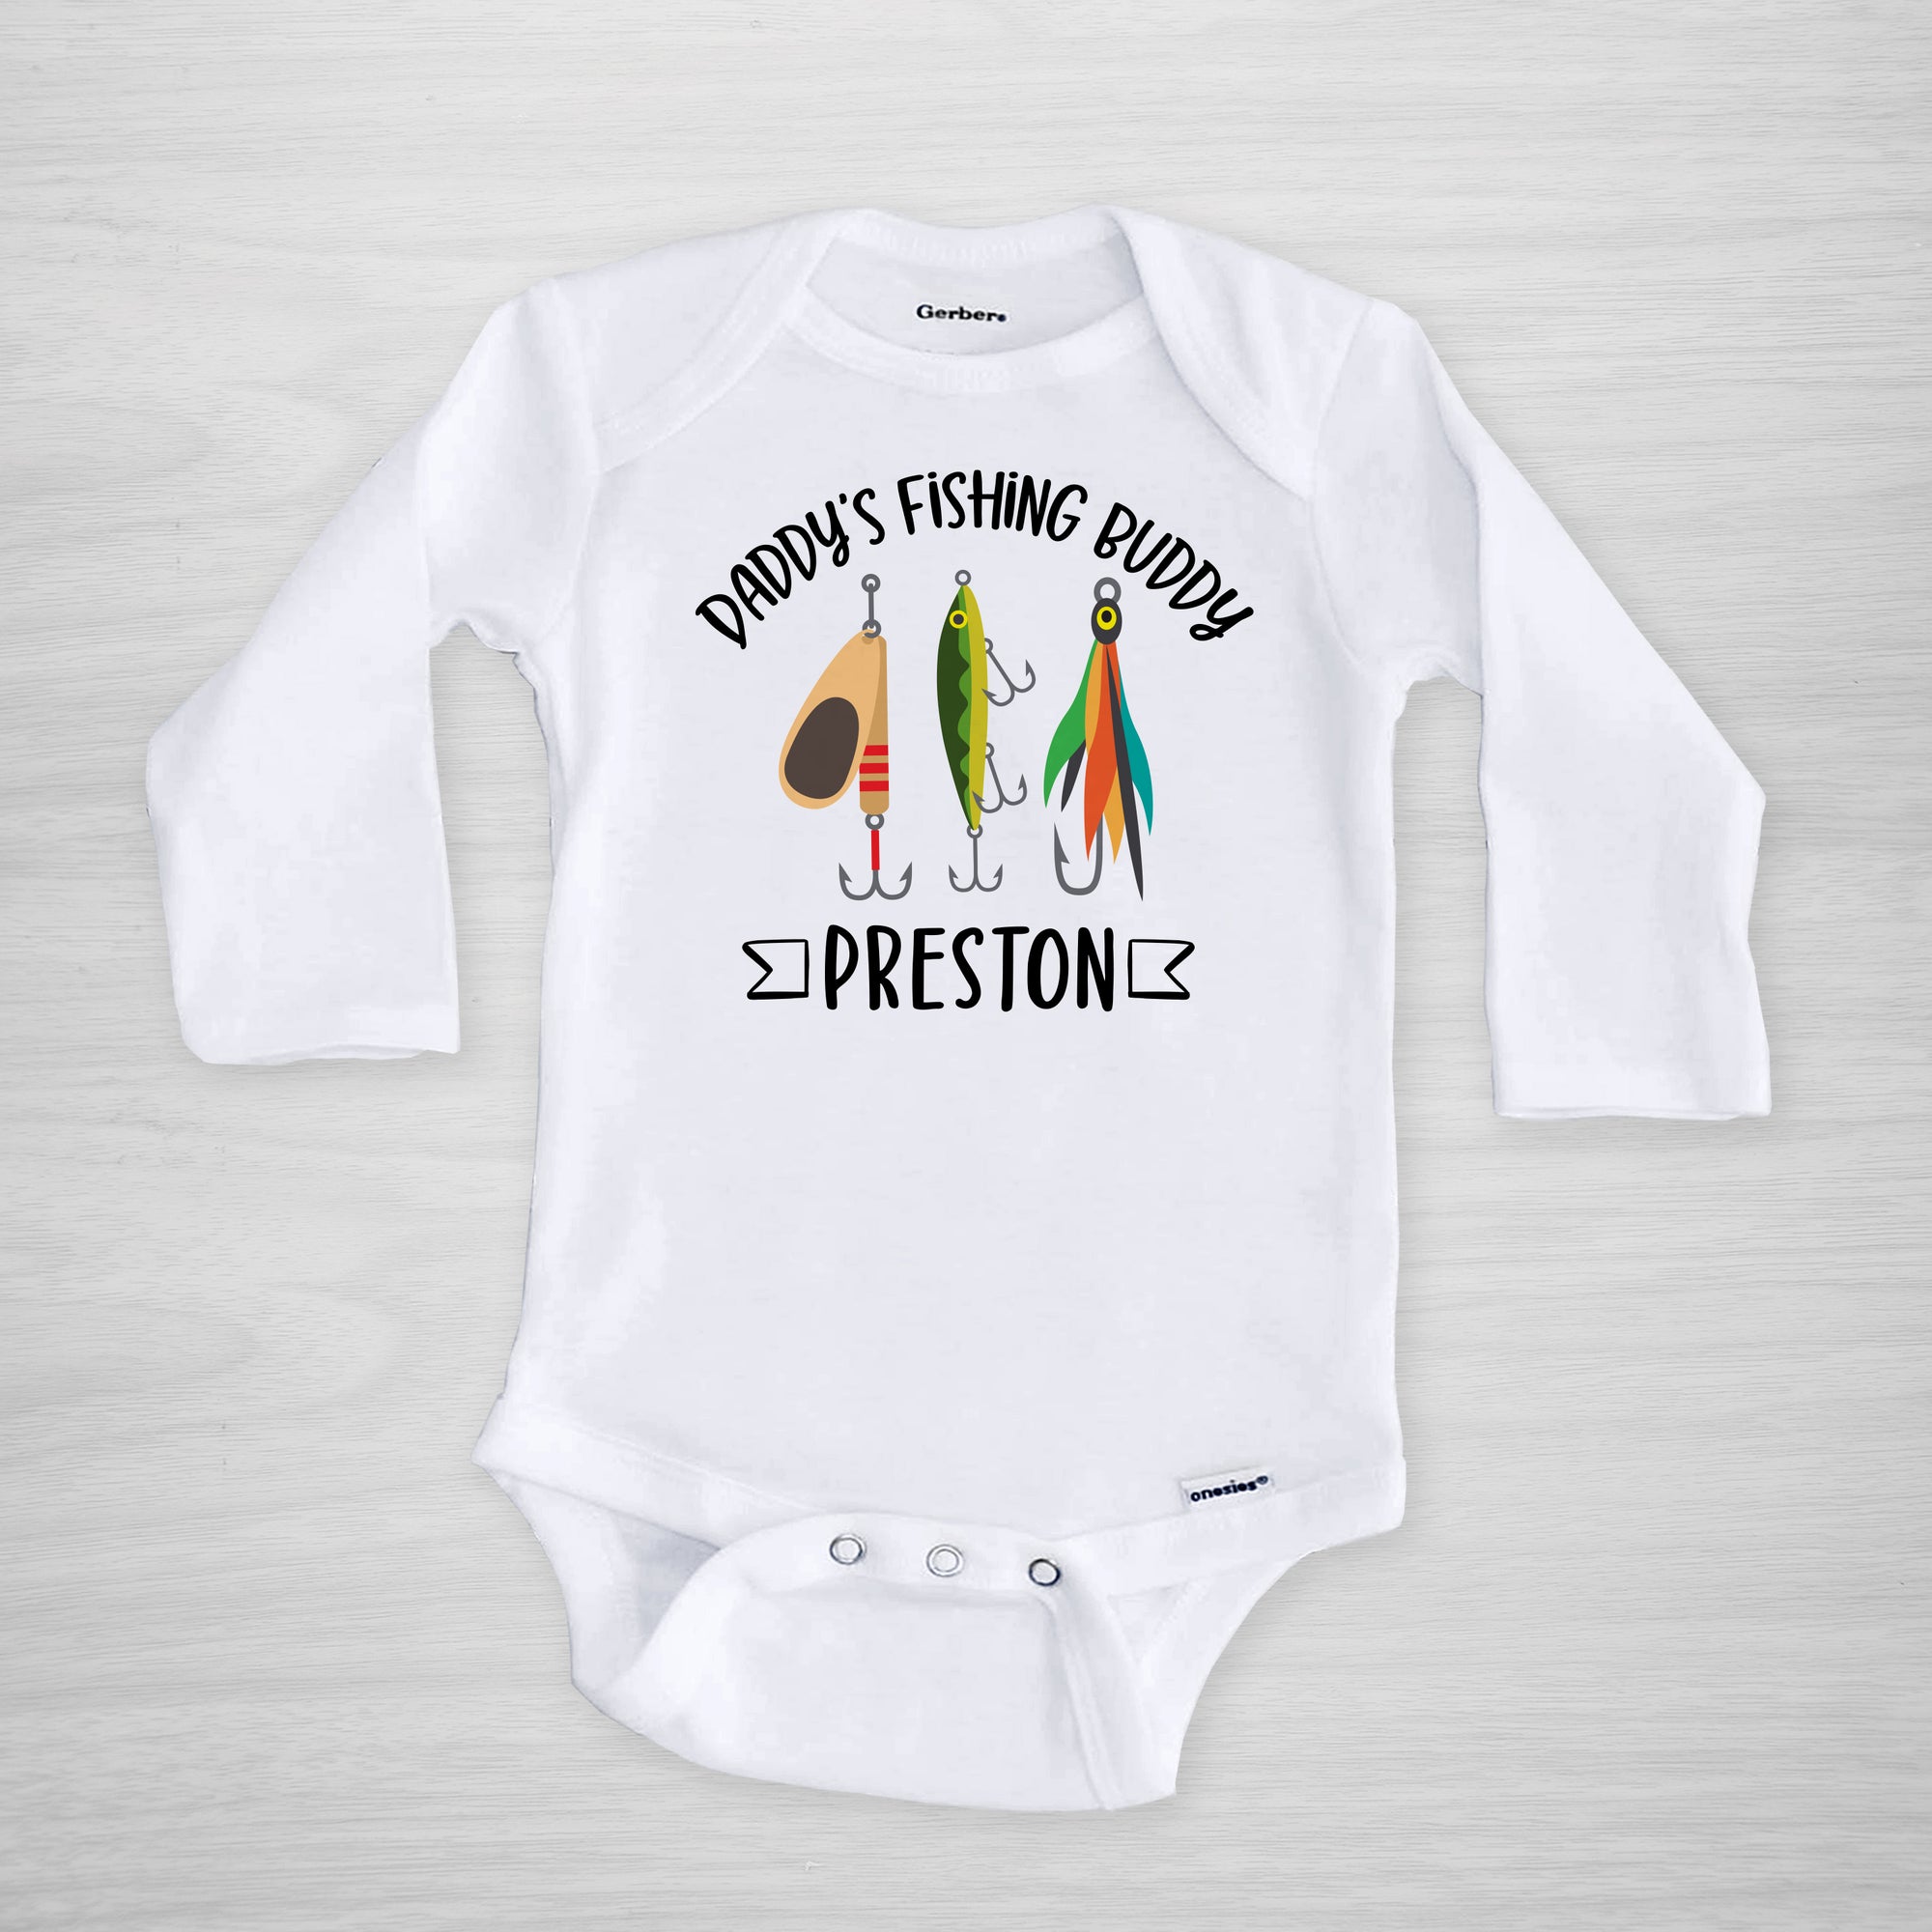 Daddy's Fishing Buddy Personalized Gerber Onesie, short sleeved